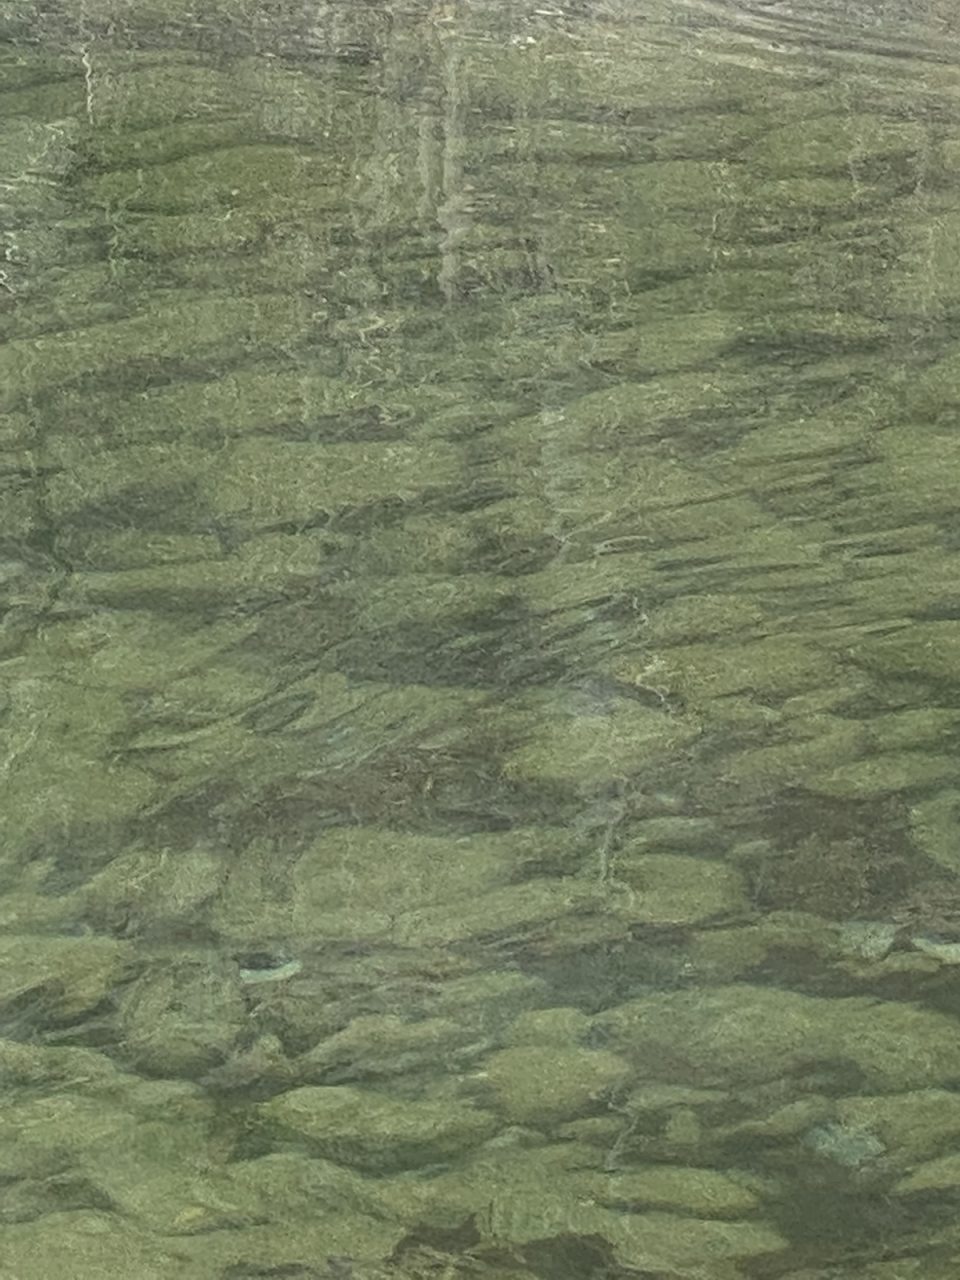 Believe it or not there is a rainbow trout in this photo, it’s tail fin is visib over a light colored rock and once you see a small part, you can see the rest. Photo: Gordon Churchill